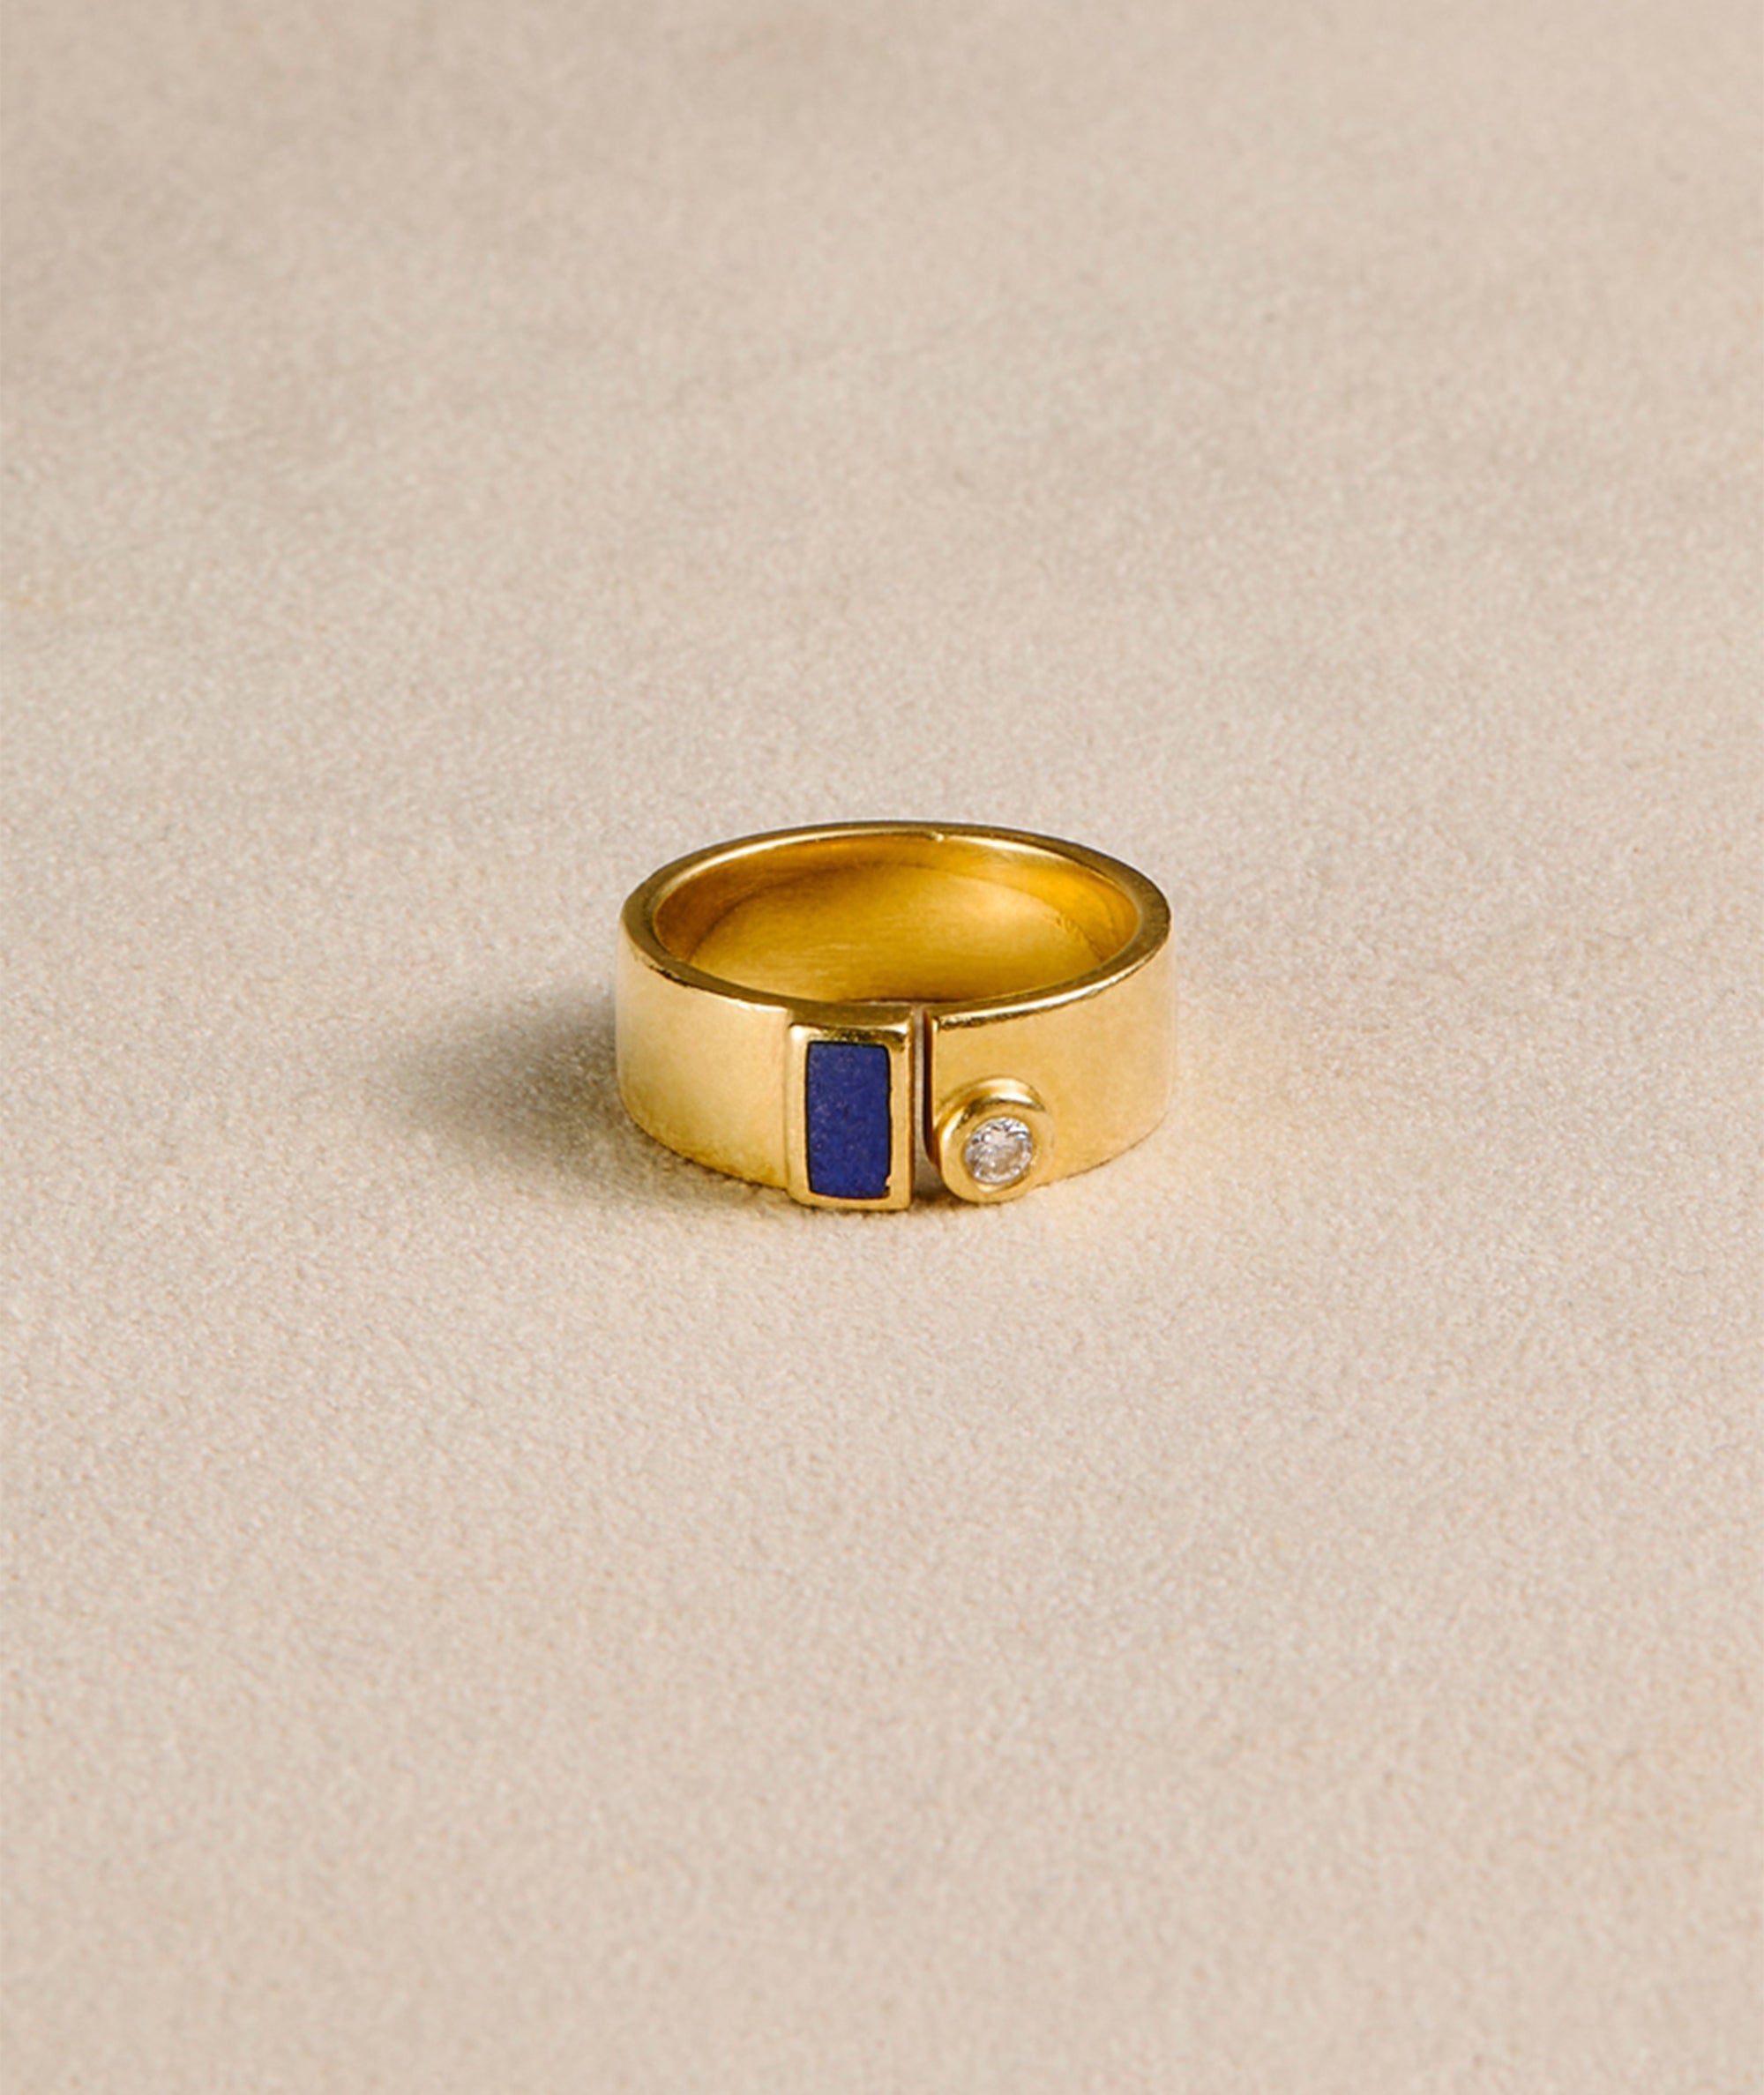 Vintage ring in yellow gold with diamond. Exclusively sourced for EREDE Curated.